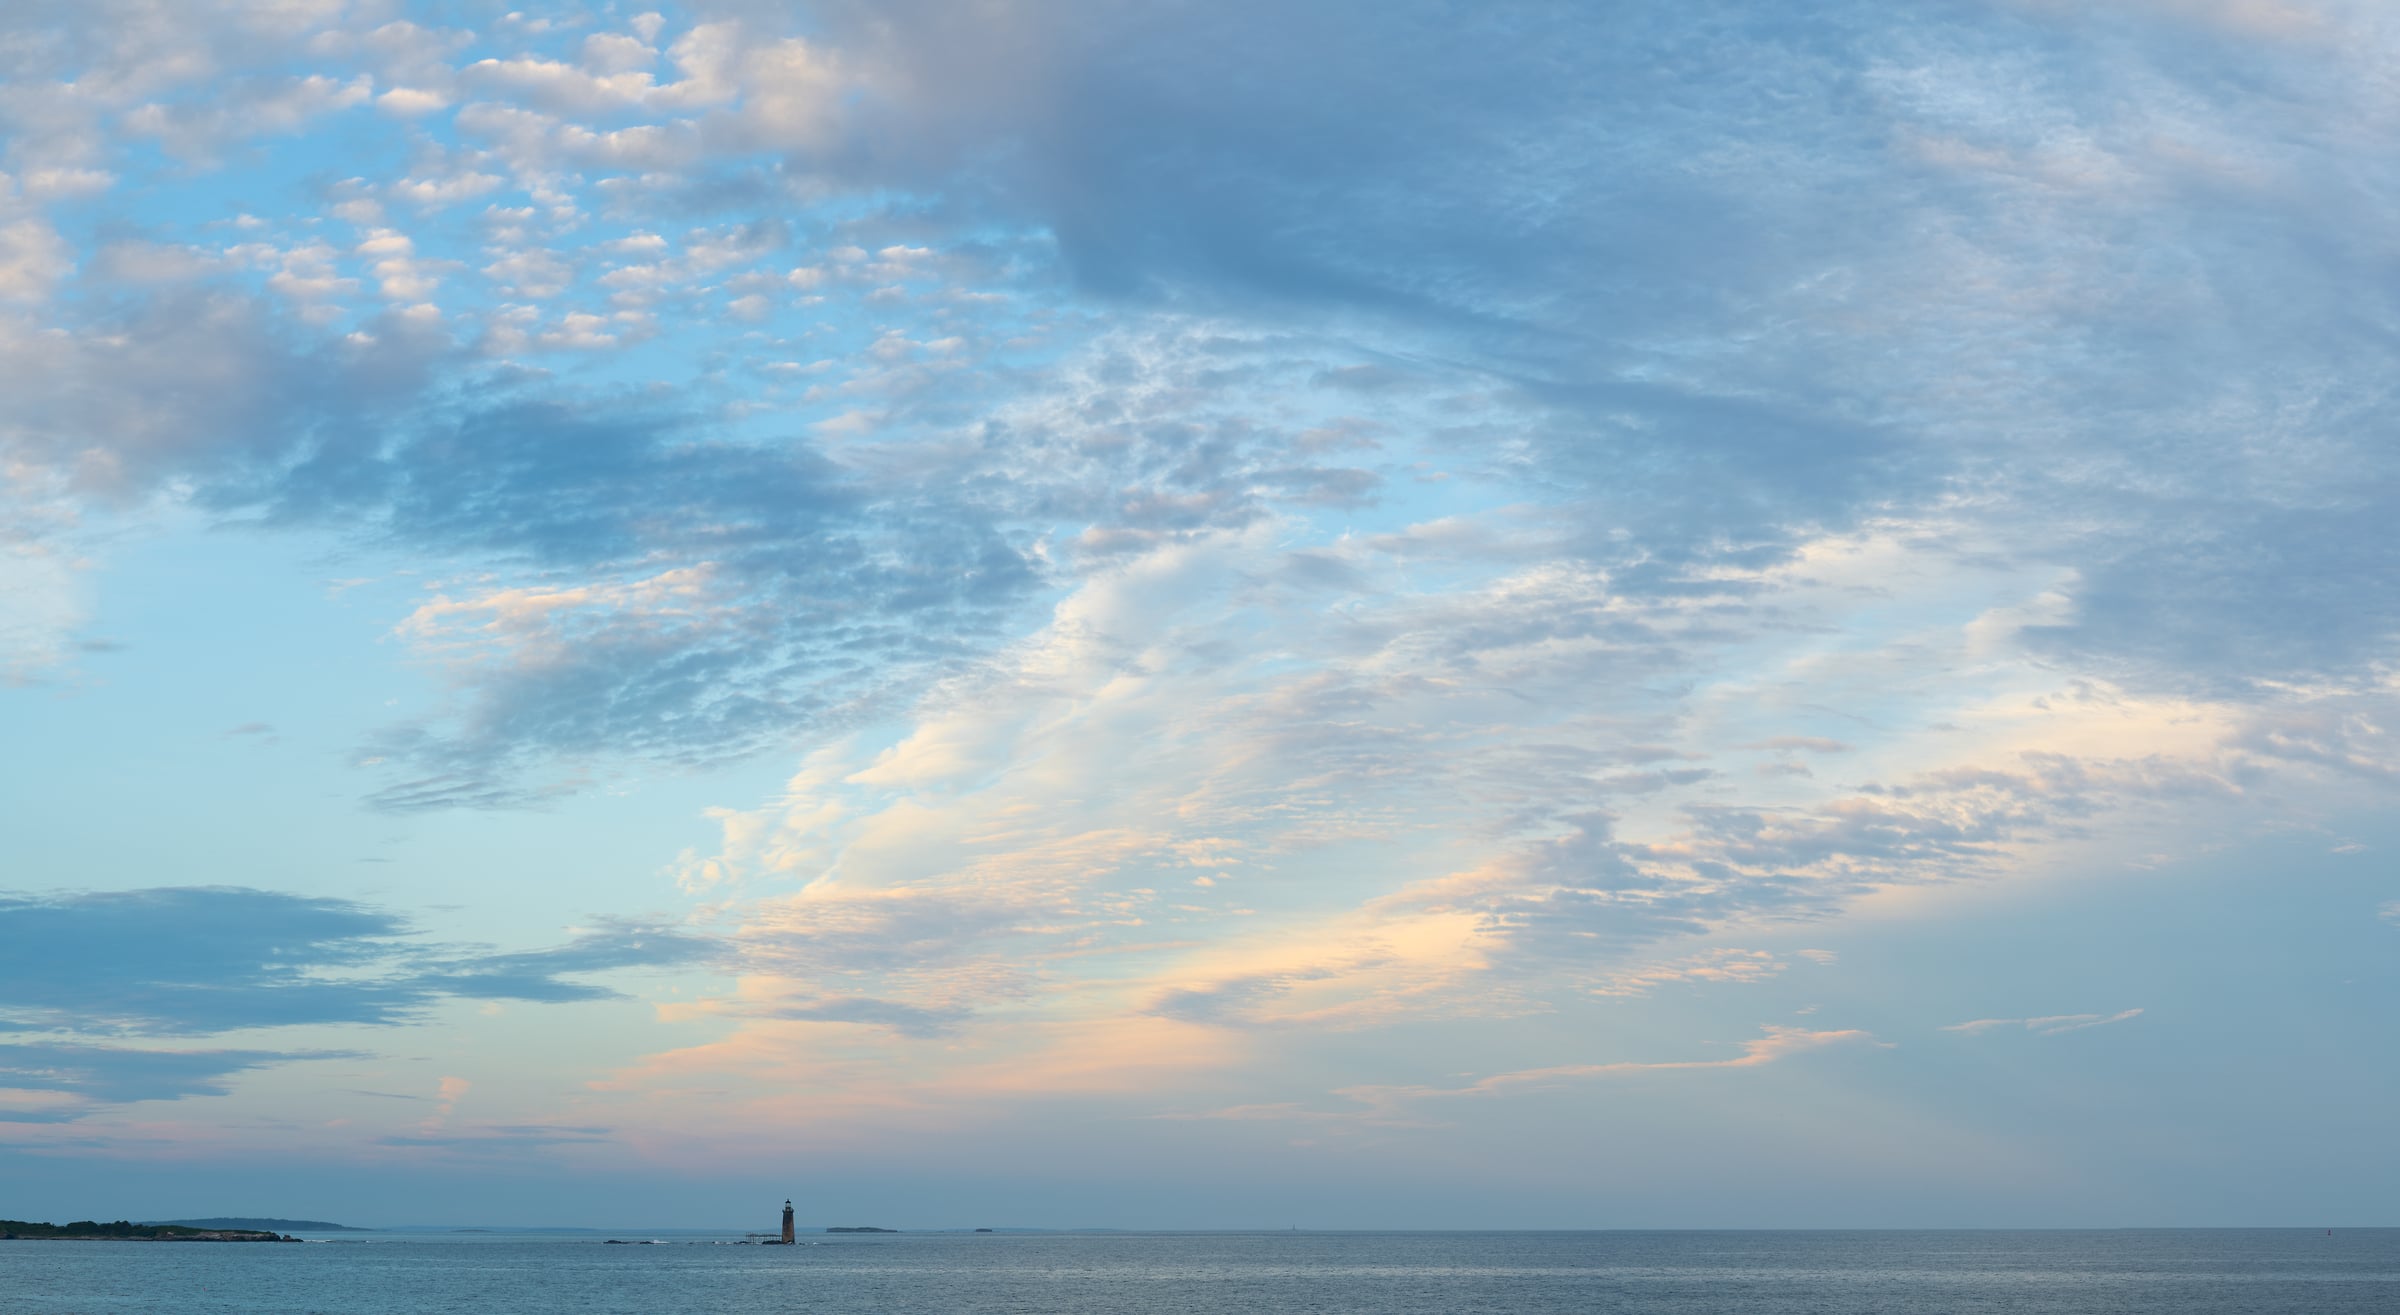 309 megapixels! A very high resolution, large-format VAST photo print of a lighthouse and beautiful clouds at sunset; photograph created by Greg Probst in Portland, Maine.